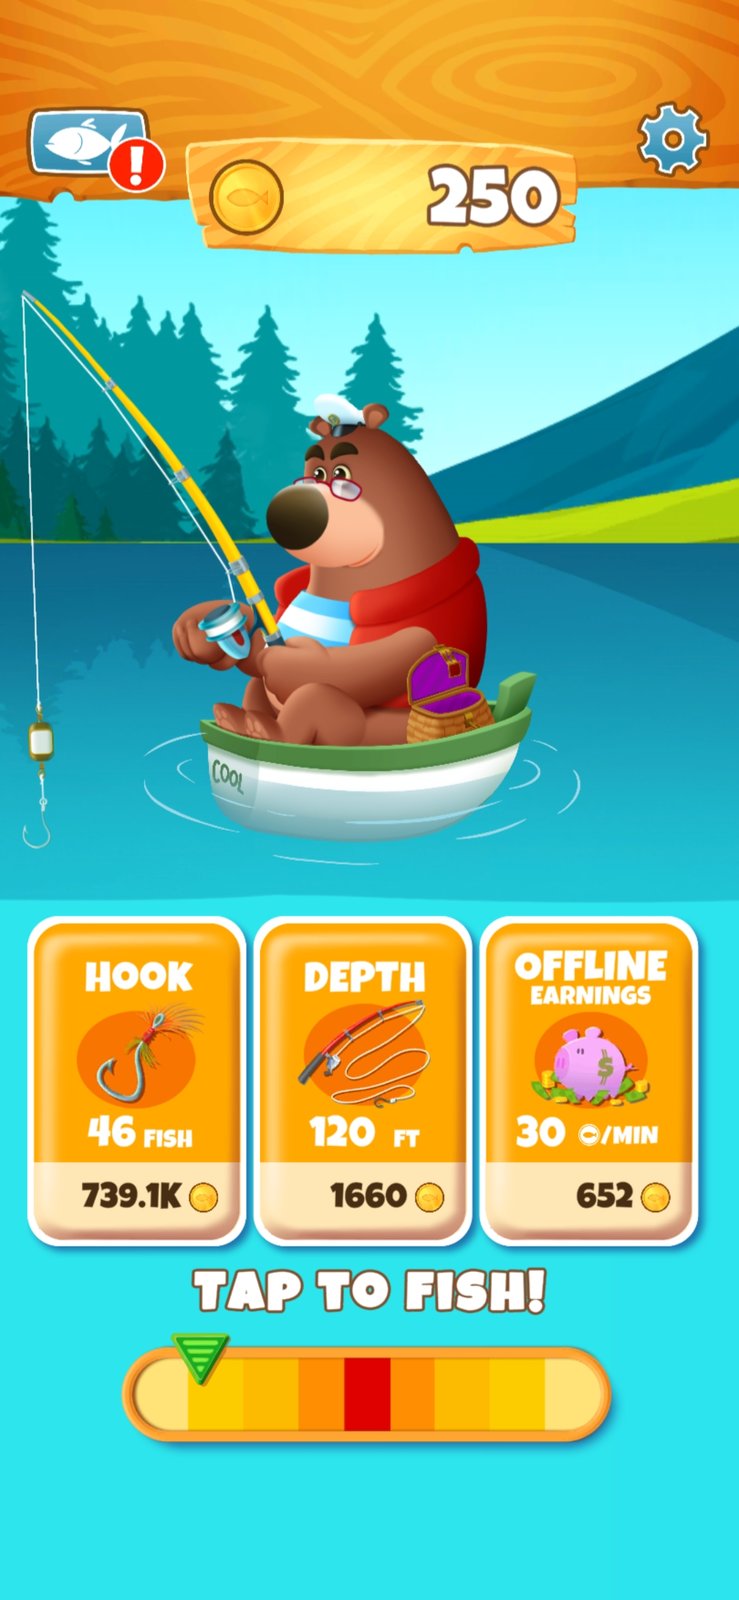 Fishing games - Bear adventure v1.9.2 Mod APK -  - Android & iOS  MODs, Mobile Games & Apps